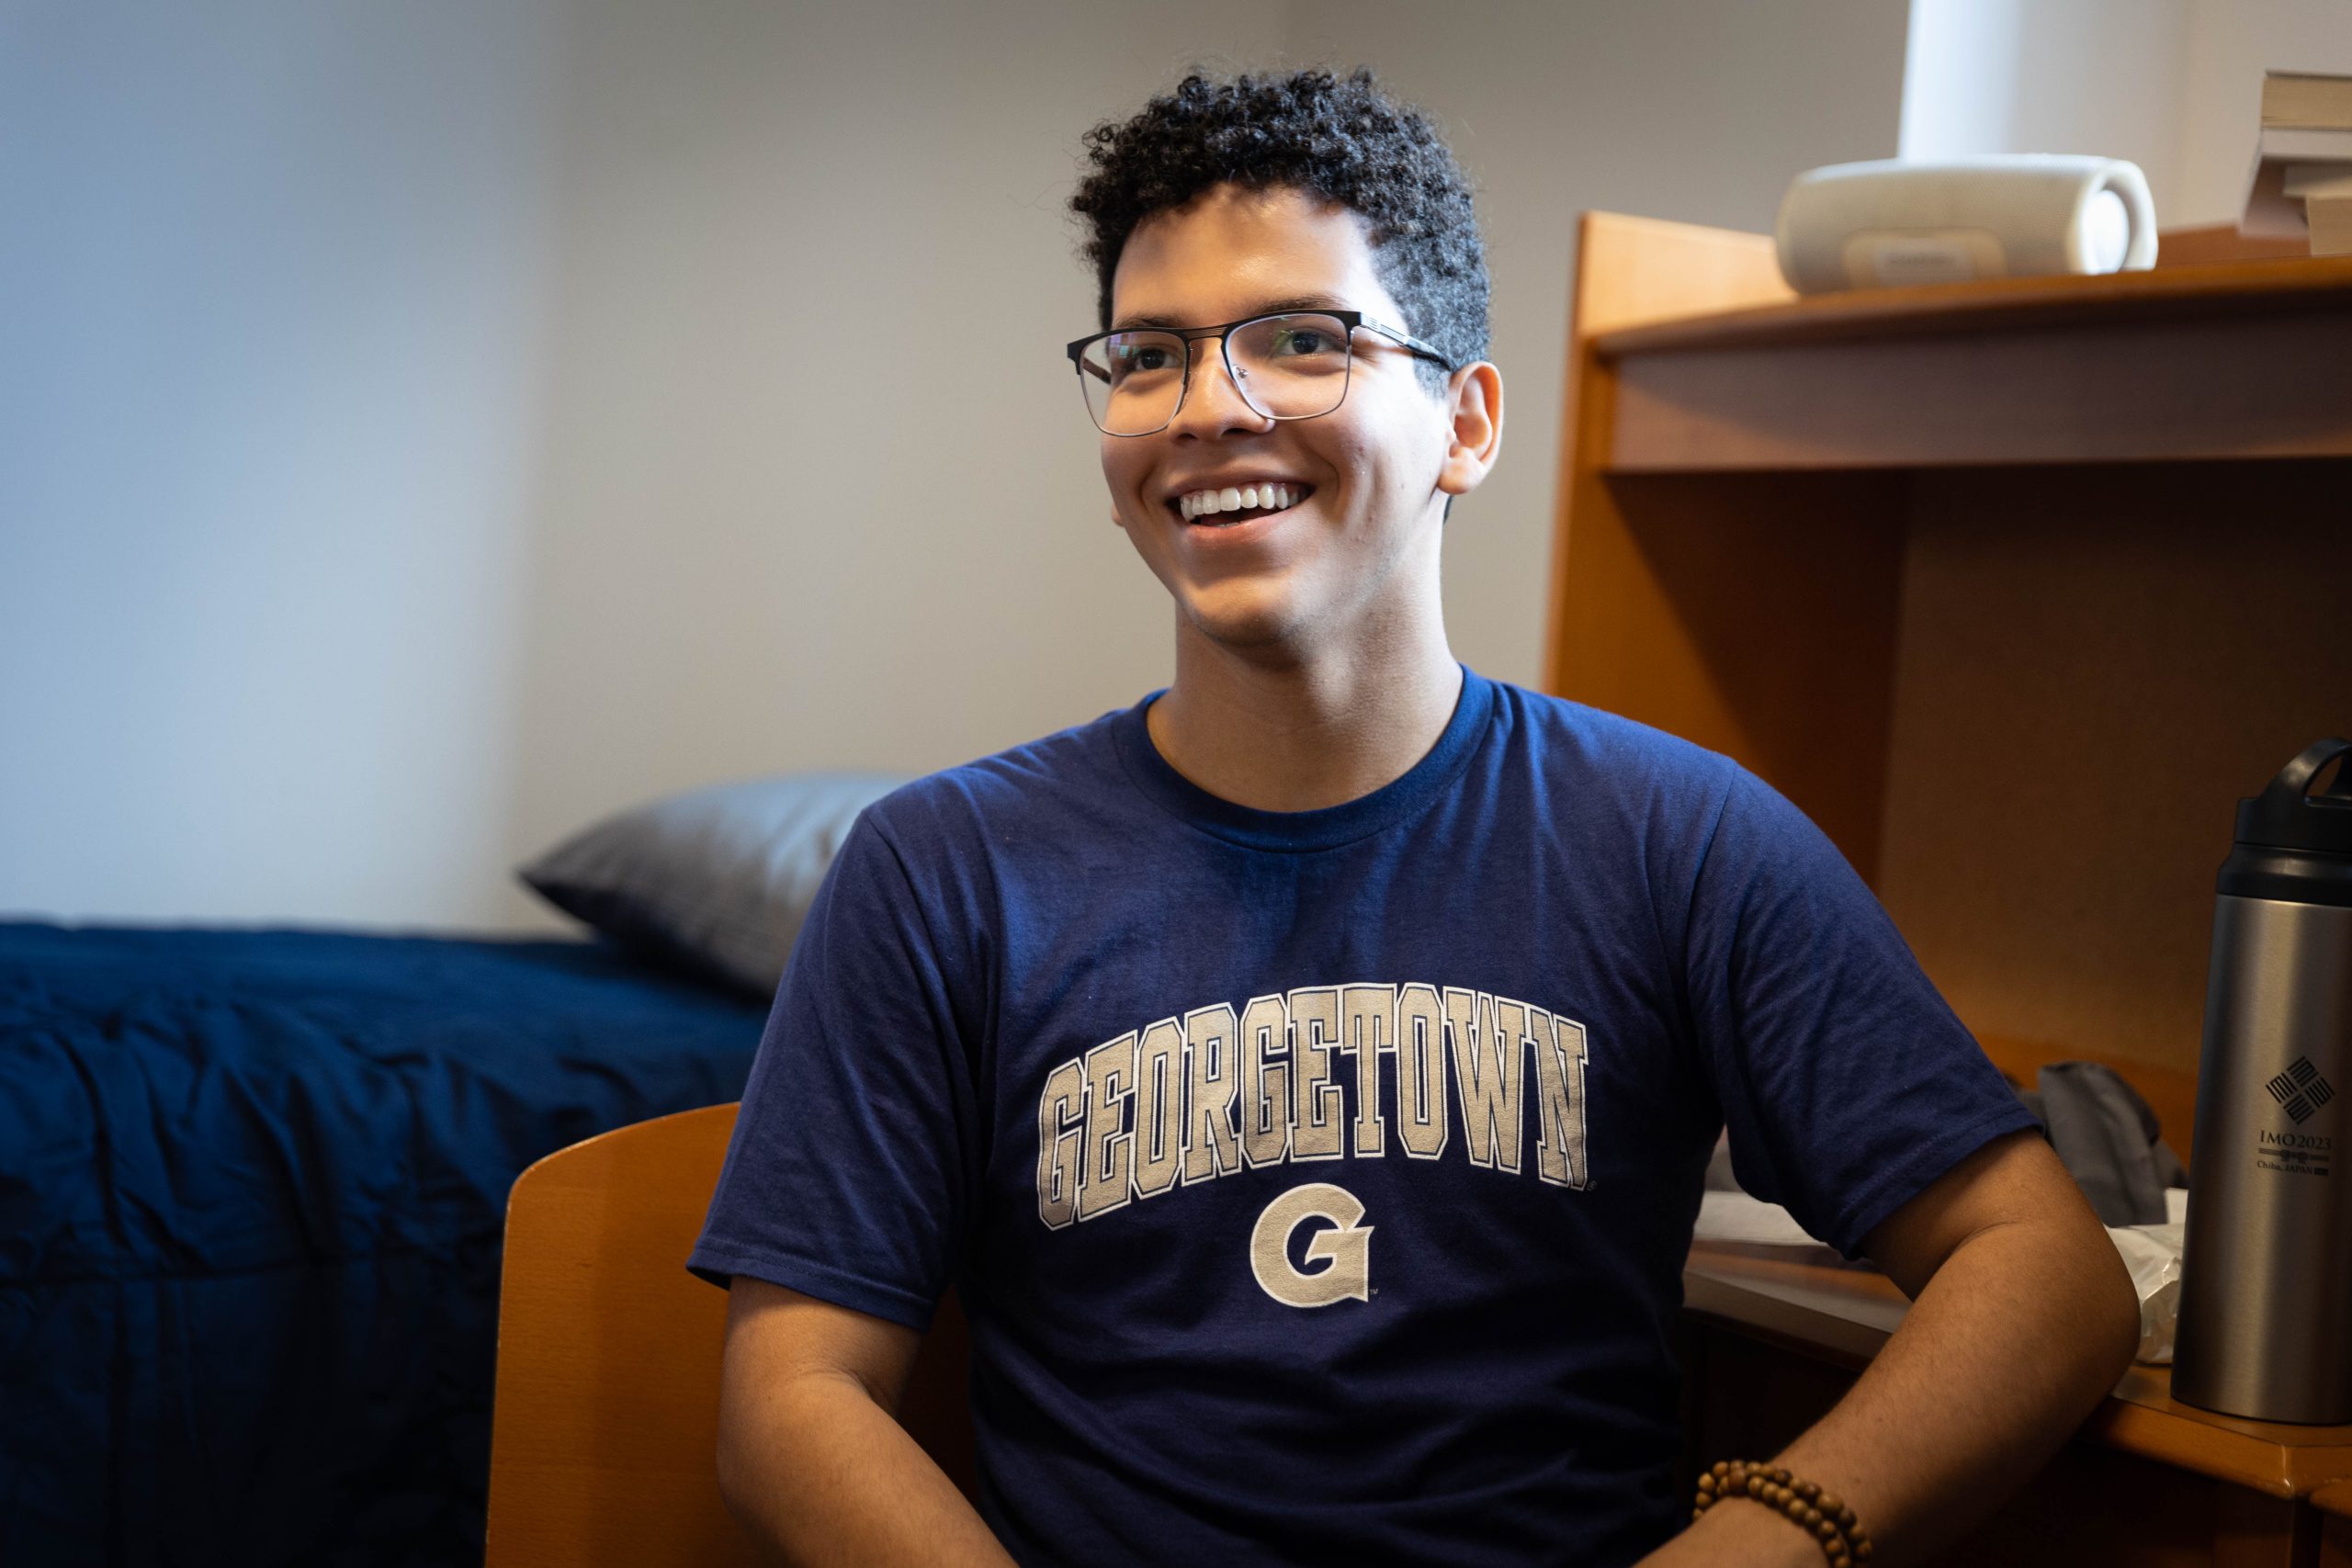 A male college student wearing glasses and a navy blue Georgetown T-shirt smiles off-camera in his dorm room on the first day of move-in.